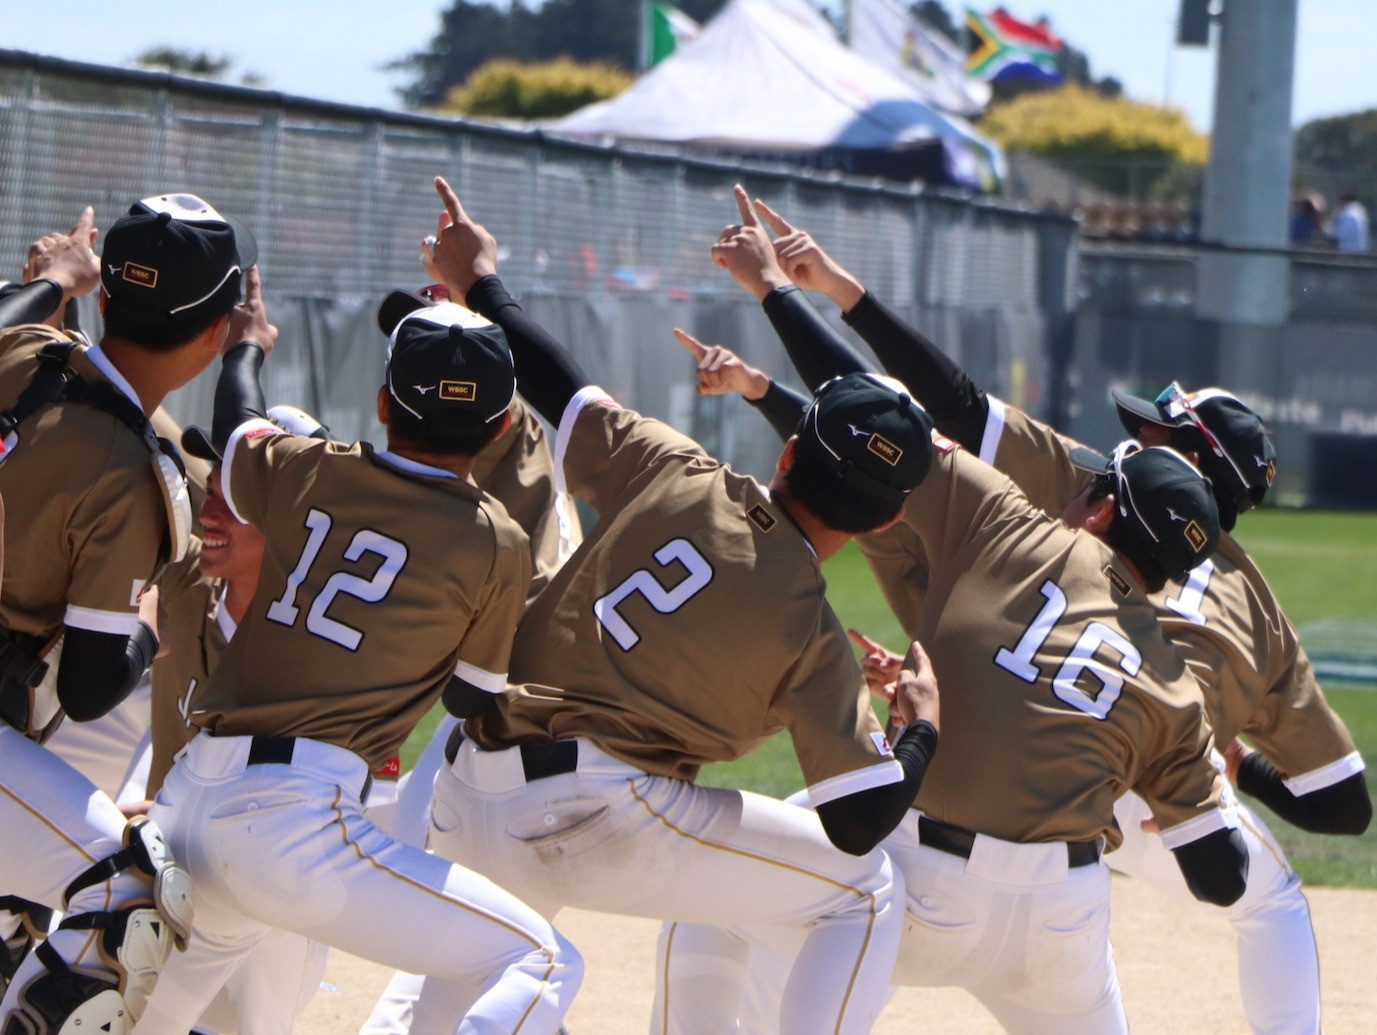 Australia and Japan remain in-form as super round begins at WBSC Under-18 Men's Softball World Cup